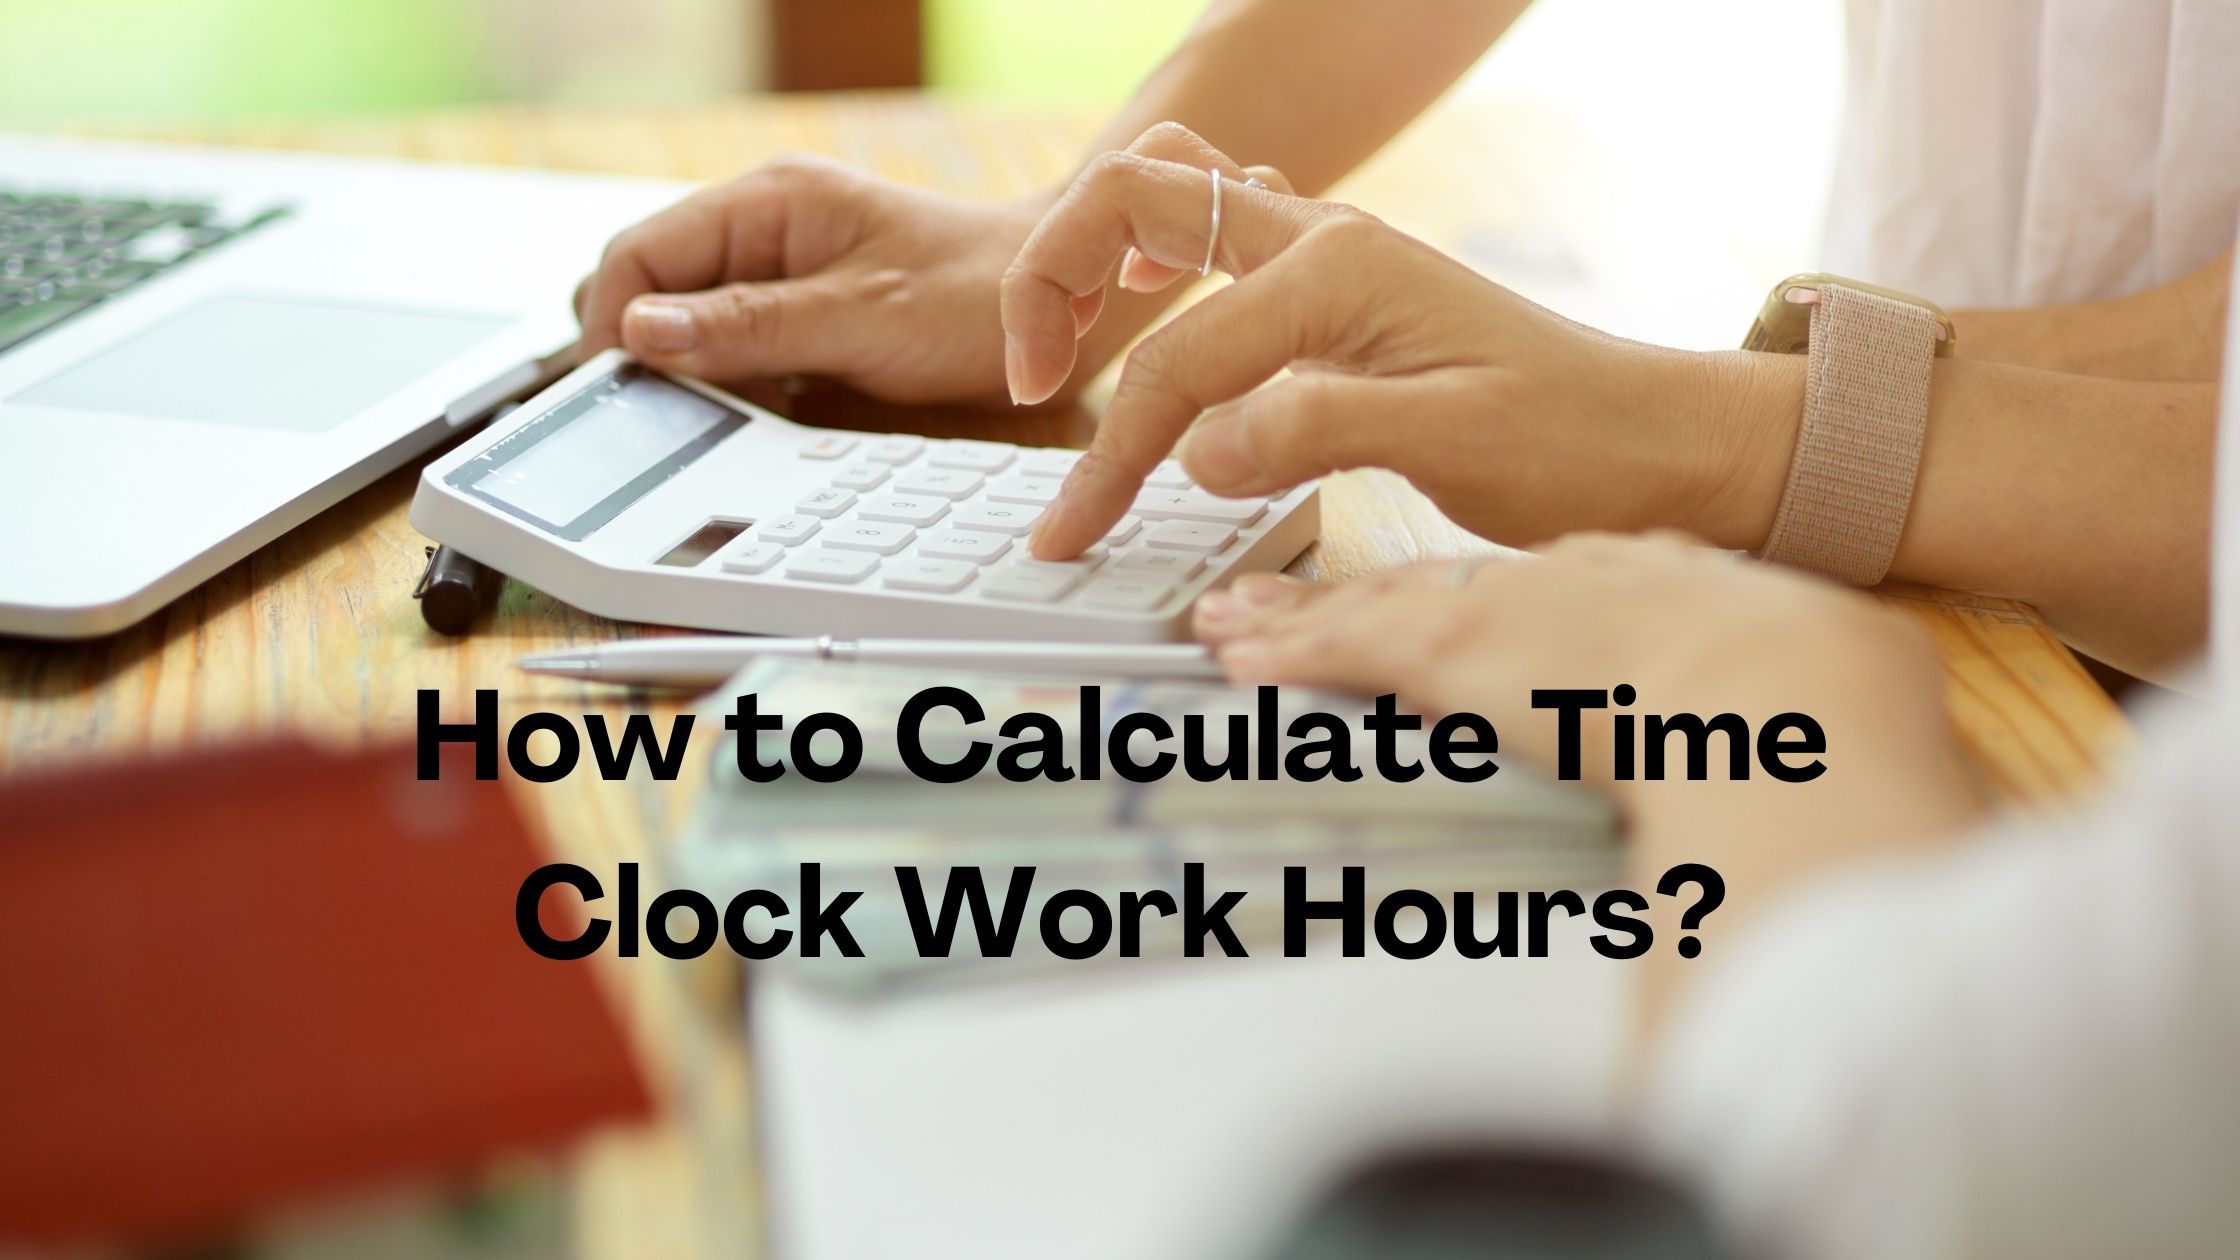 How to Calculate Time Clock Work Hours